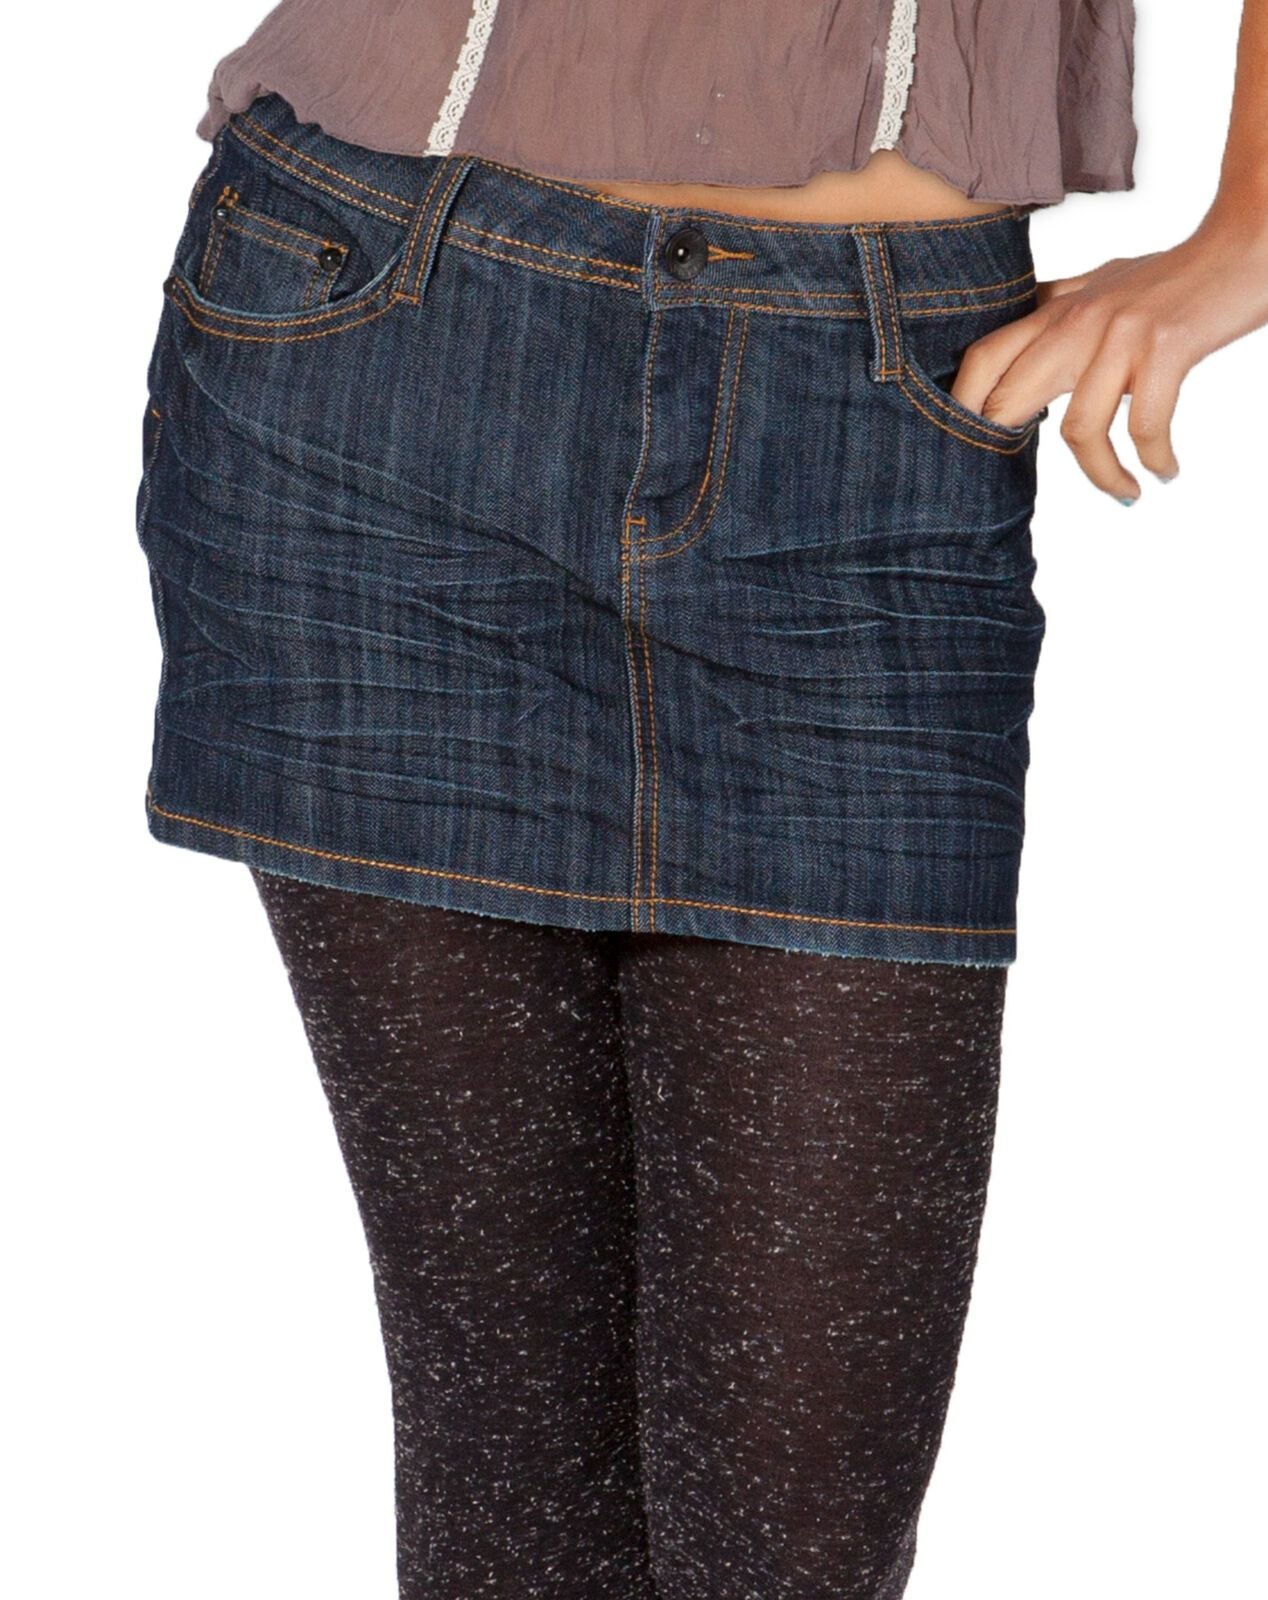 Focus on midriff, highlighting indigo mini skirt with creasing effect from Dungarees Online.